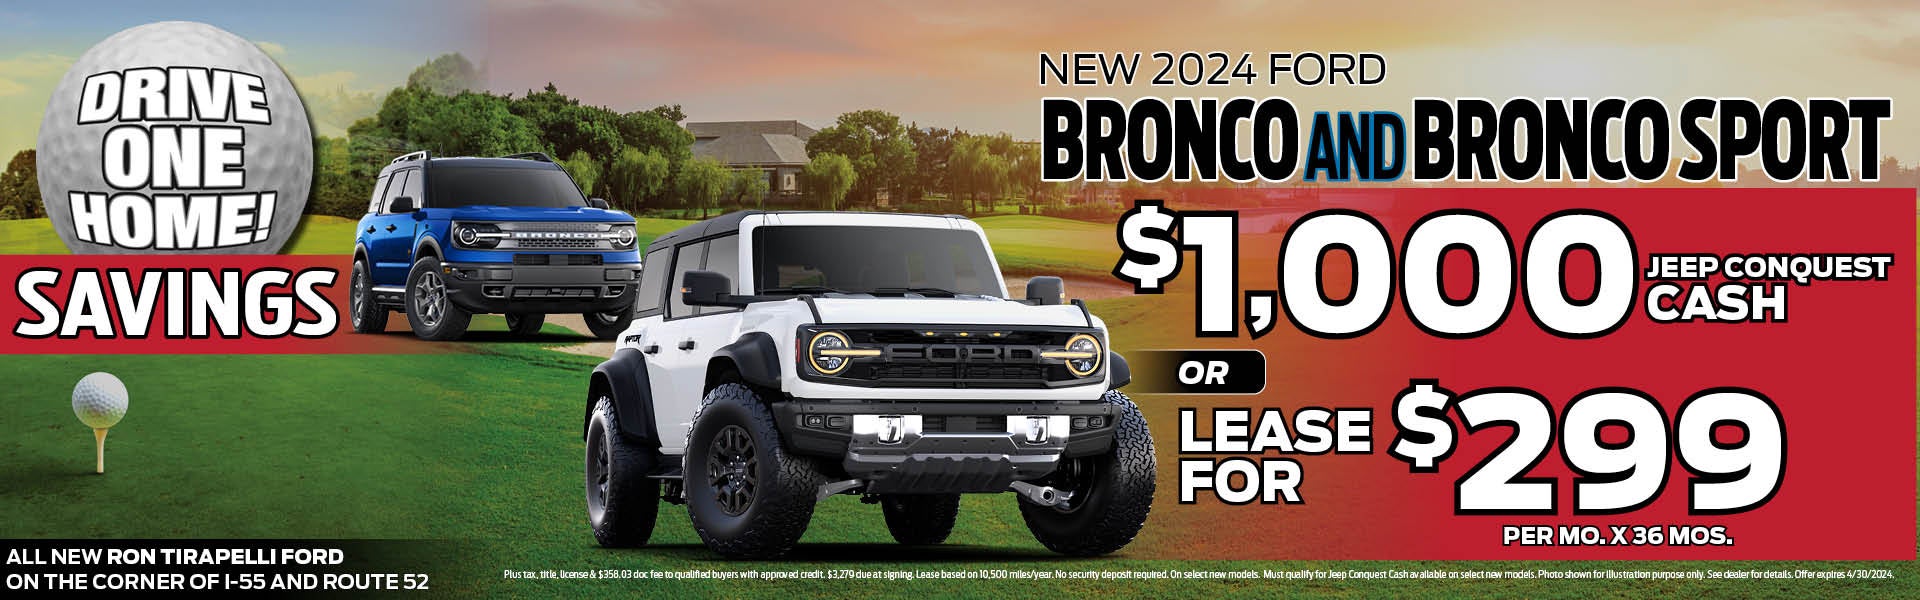 2024 Ford Bronco & Bronco Sport Lease Offer